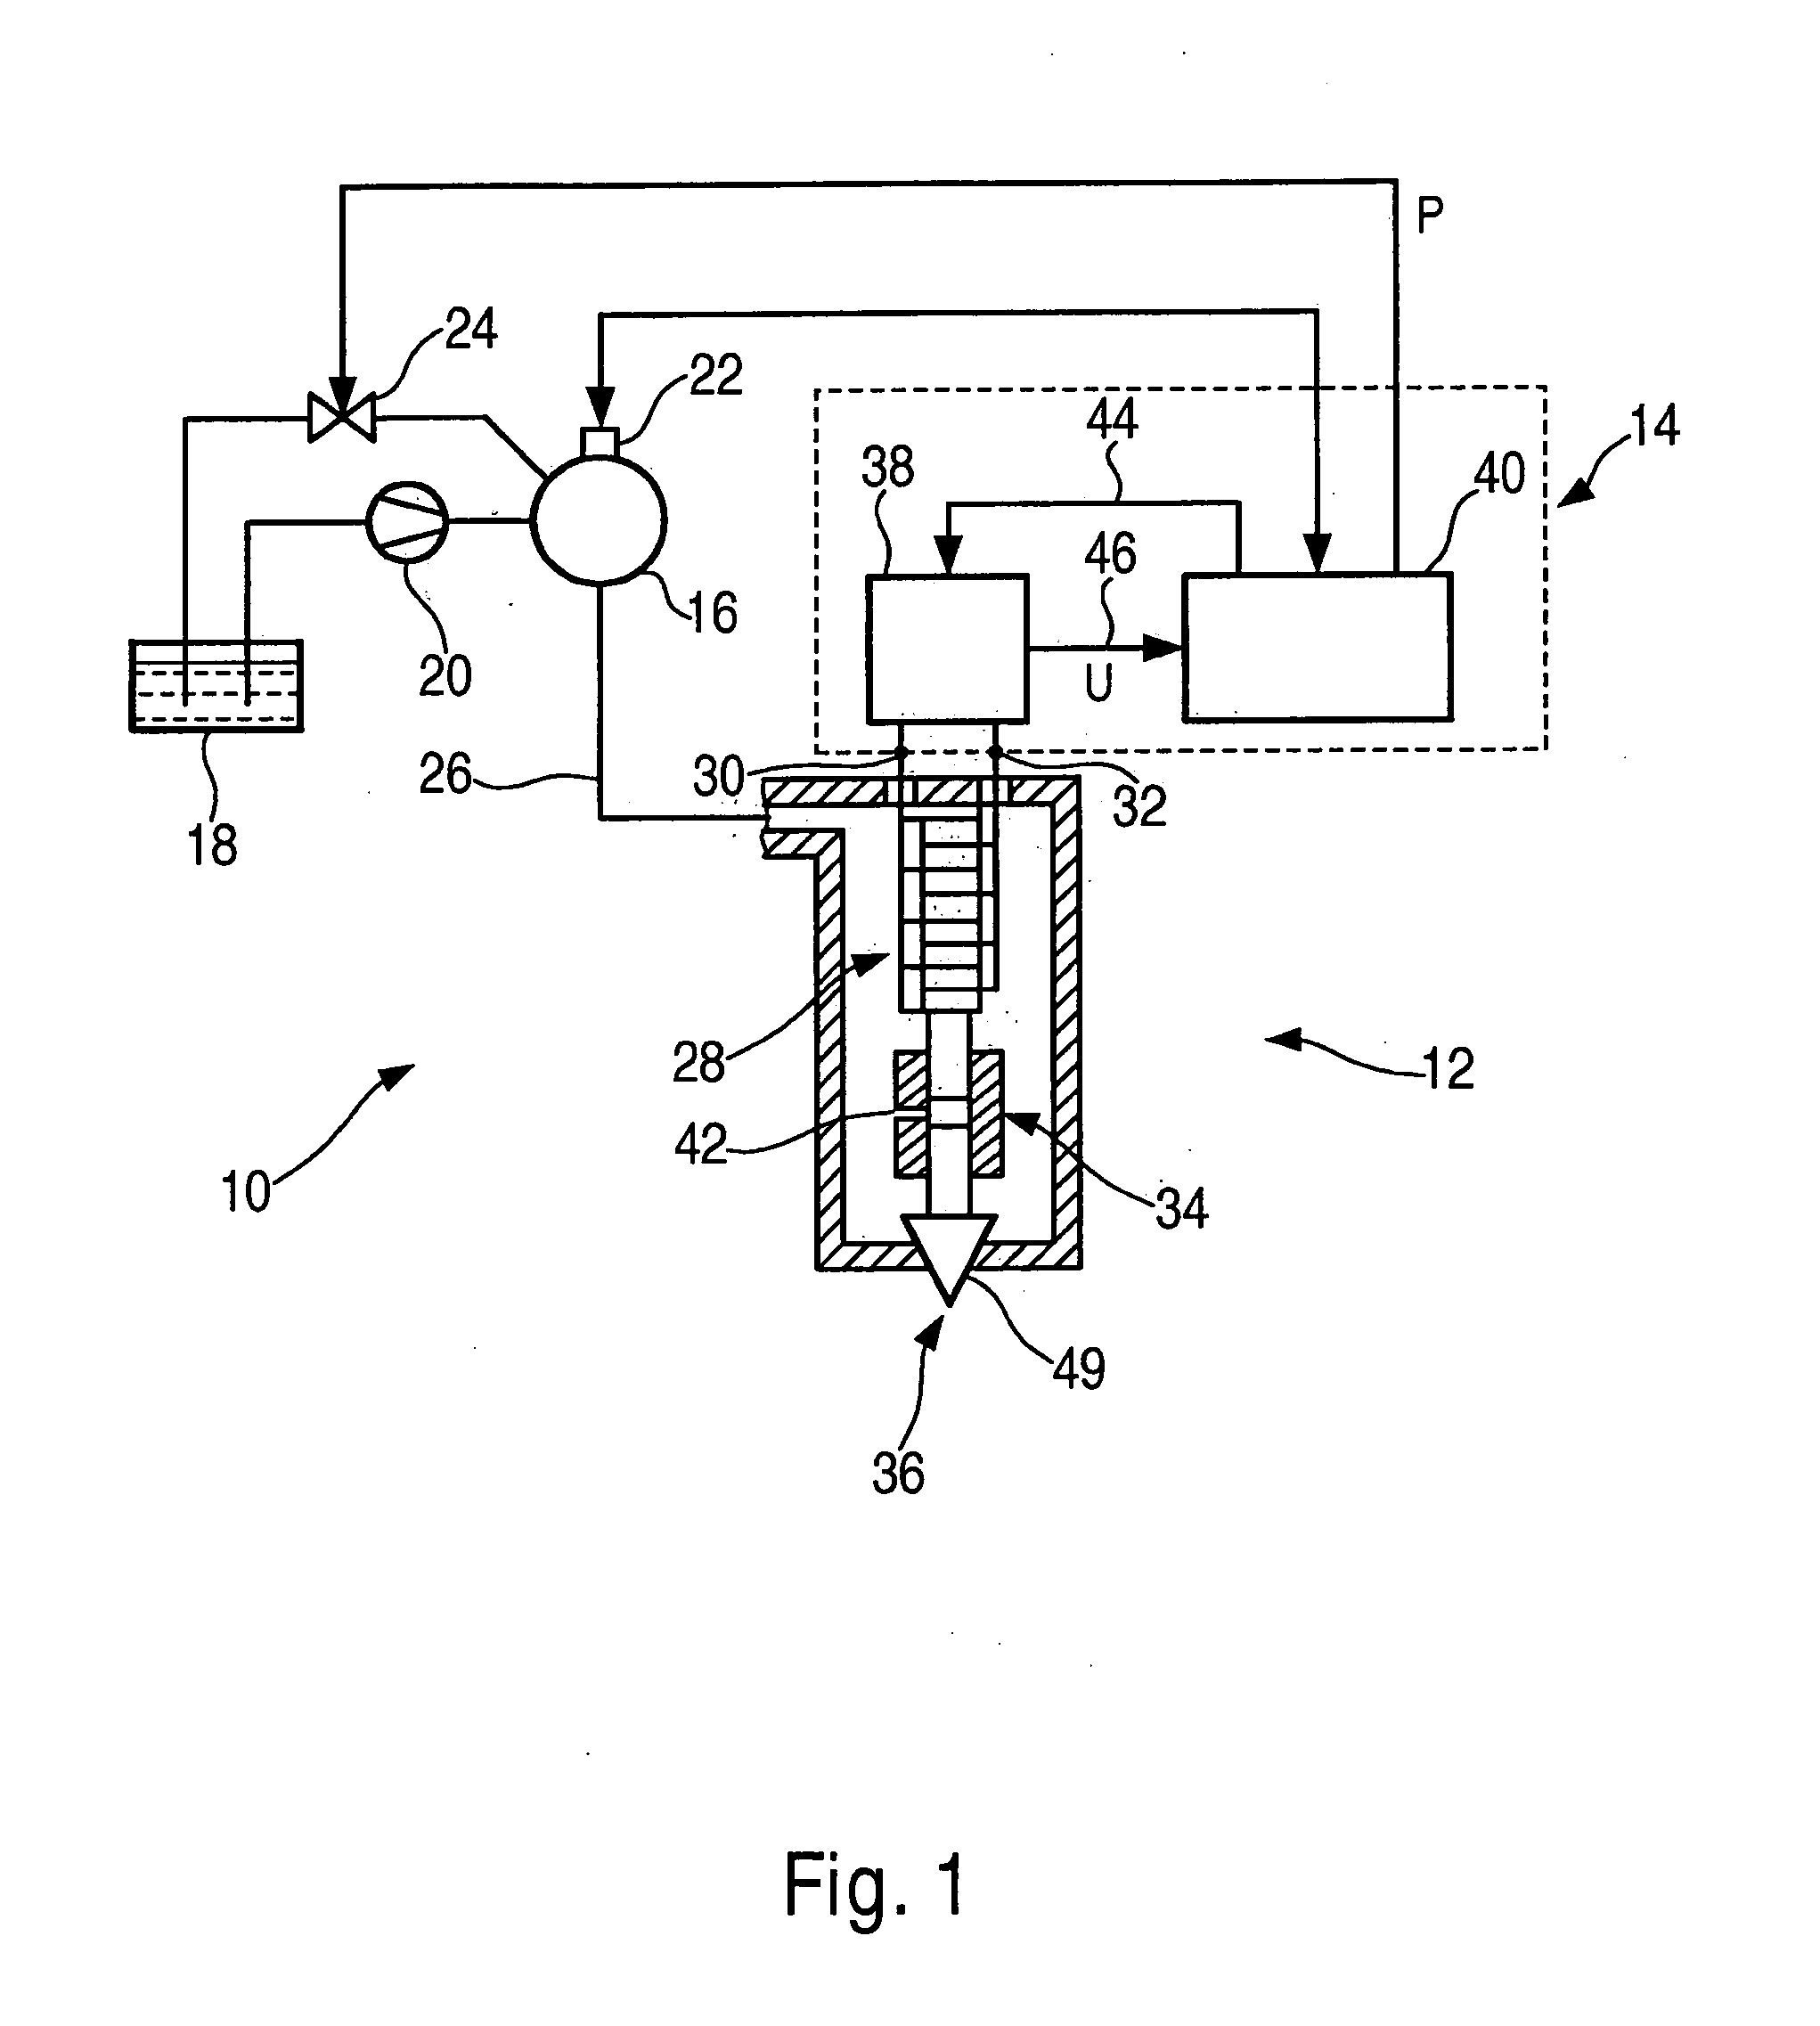 Method for Determining an Opening Voltage of a Piezoelectric Injector